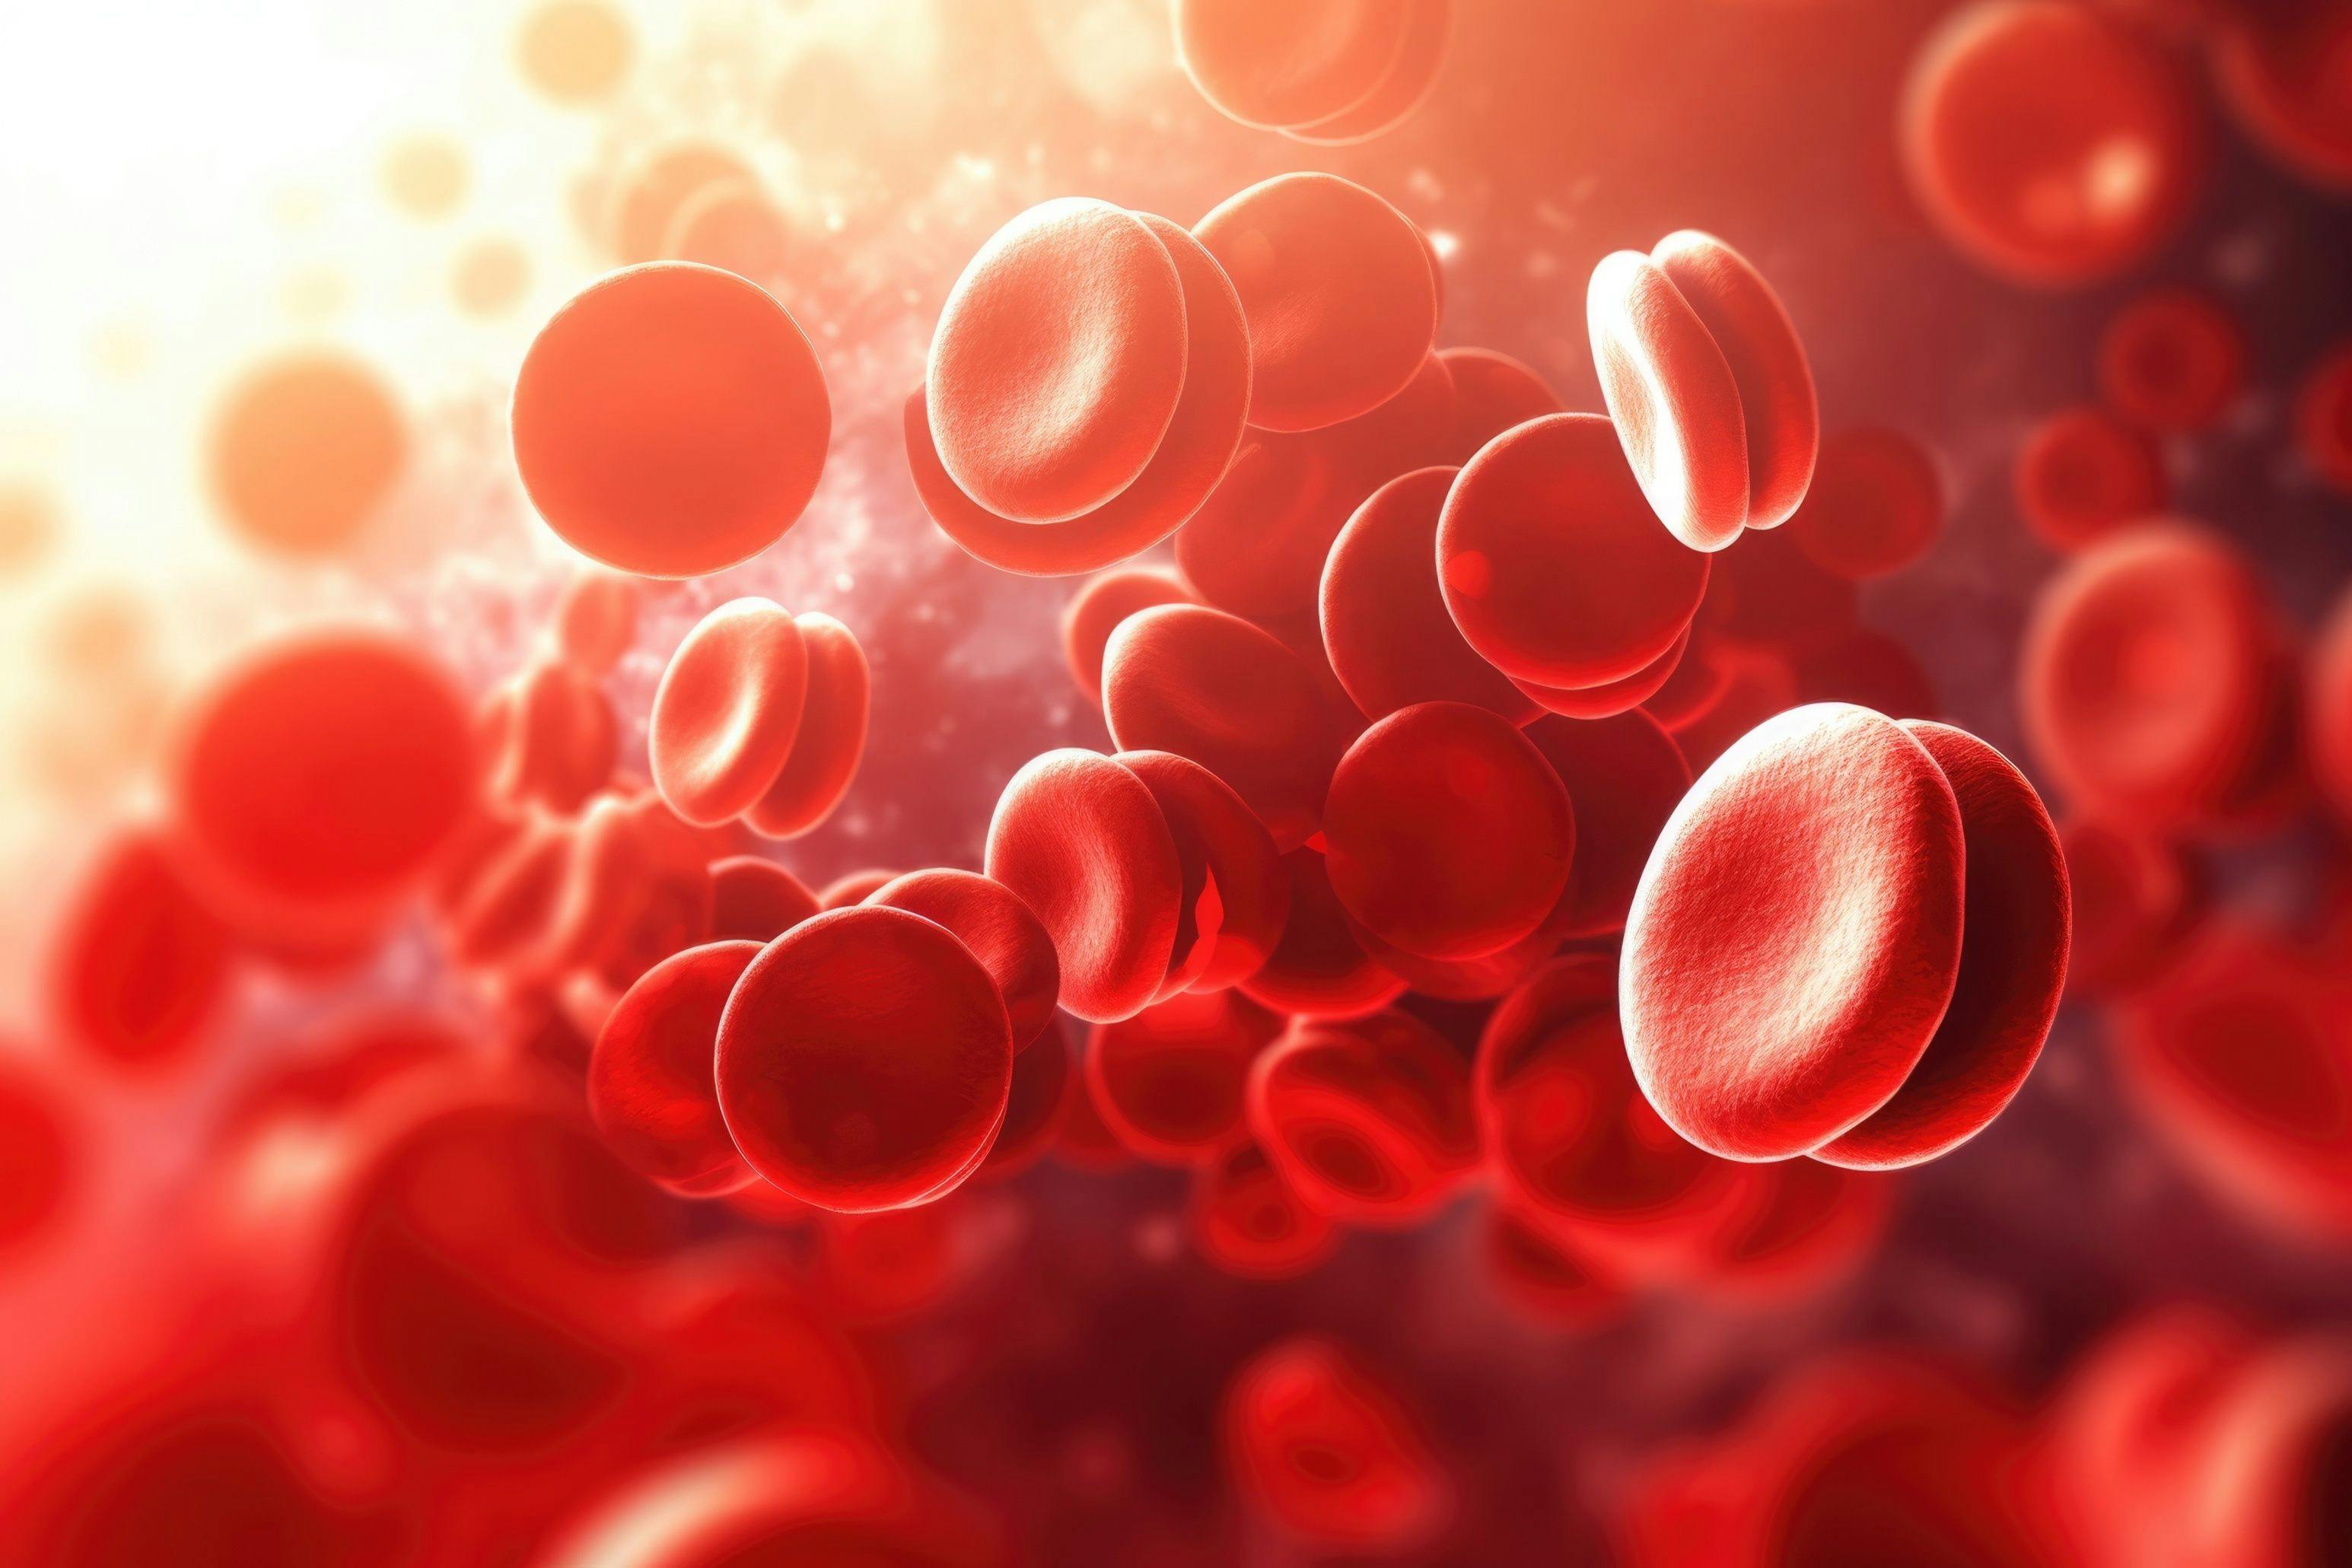 Hot topics in diagnosing, preventing, and treating central line associated bloodstream infections